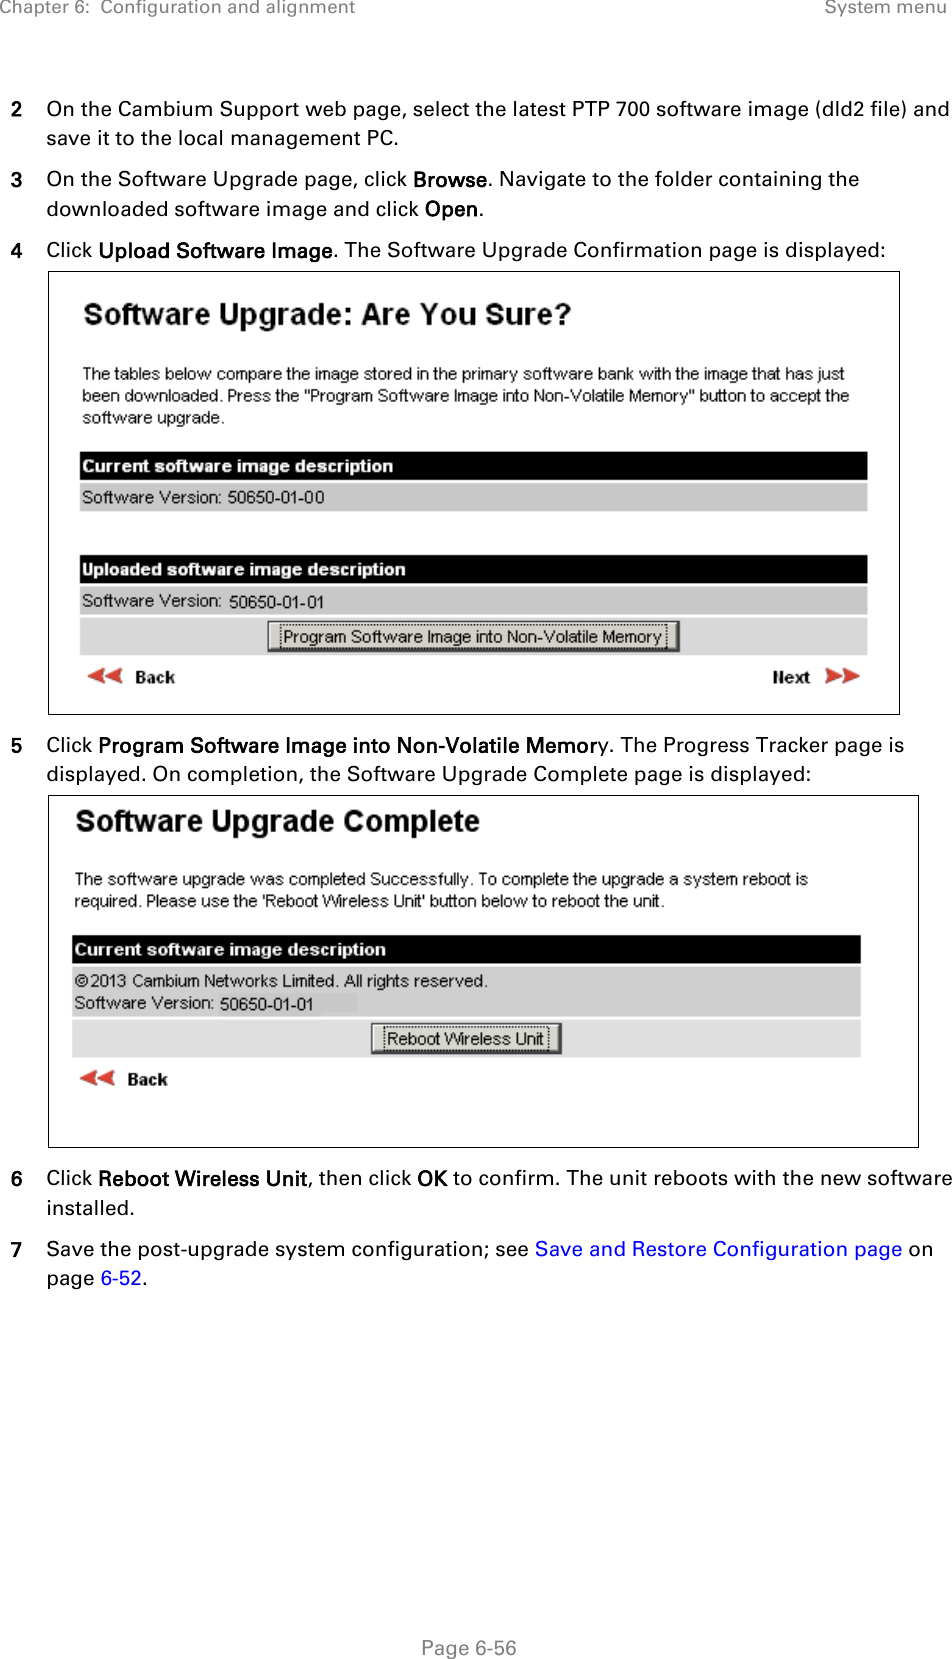 Chapter 6:  Configuration and alignment System menu  2 On the Cambium Support web page, select the latest PTP 700 software image (dld2 file) and save it to the local management PC. 3 On the Software Upgrade page, click Browse. Navigate to the folder containing the downloaded software image and click Open. 4 Click Upload Software Image. The Software Upgrade Confirmation page is displayed:  5 Click Program Software Image into Non-Volatile Memory. The Progress Tracker page is displayed. On completion, the Software Upgrade Complete page is displayed:  6 Click Reboot Wireless Unit, then click OK to confirm. The unit reboots with the new software installed. 7 Save the post-upgrade system configuration; see Save and Restore Configuration page on page 6-52.   Page 6-56 